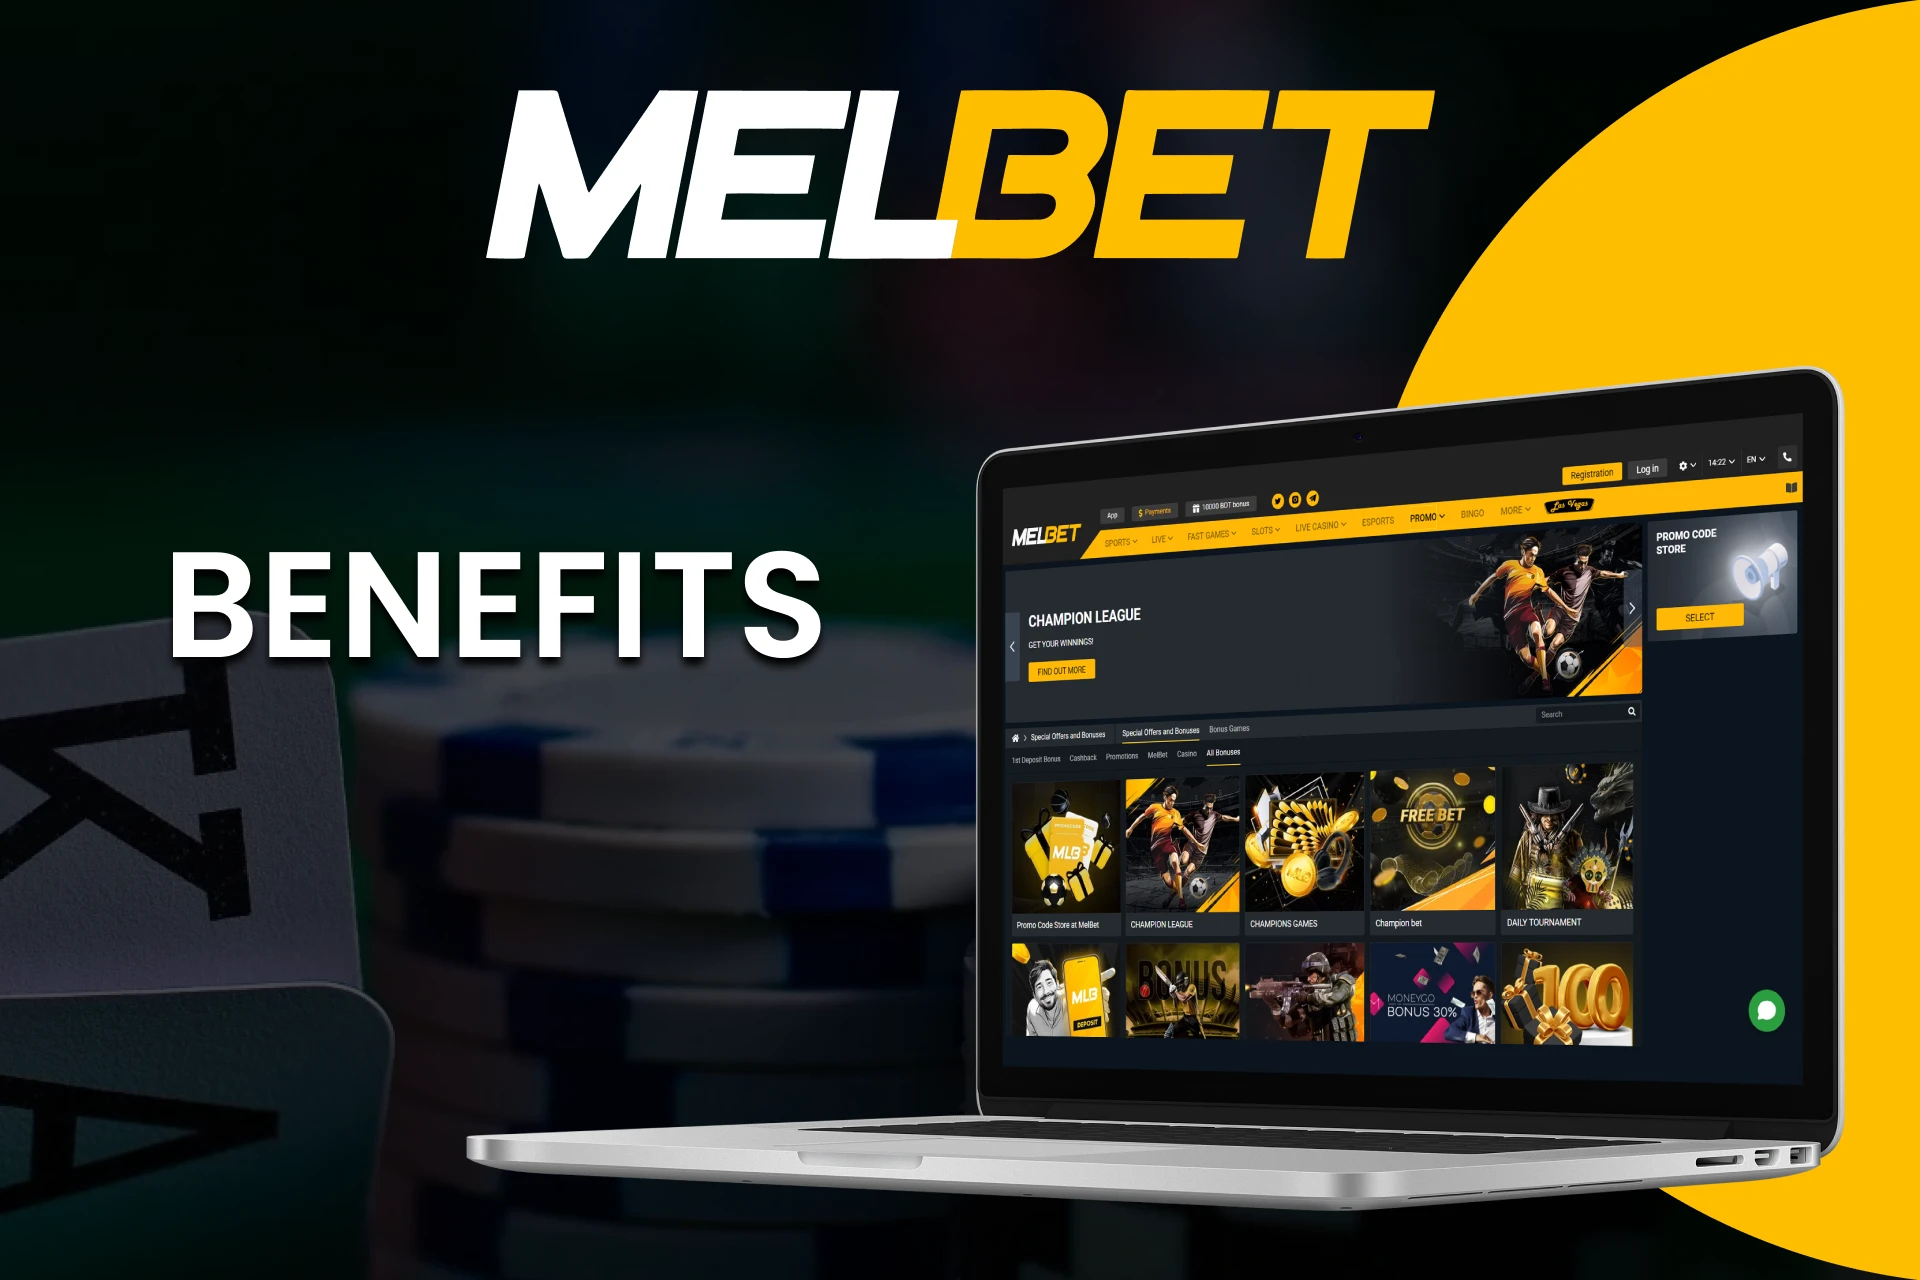 Find out the benefits of playing Poker at Melbet.